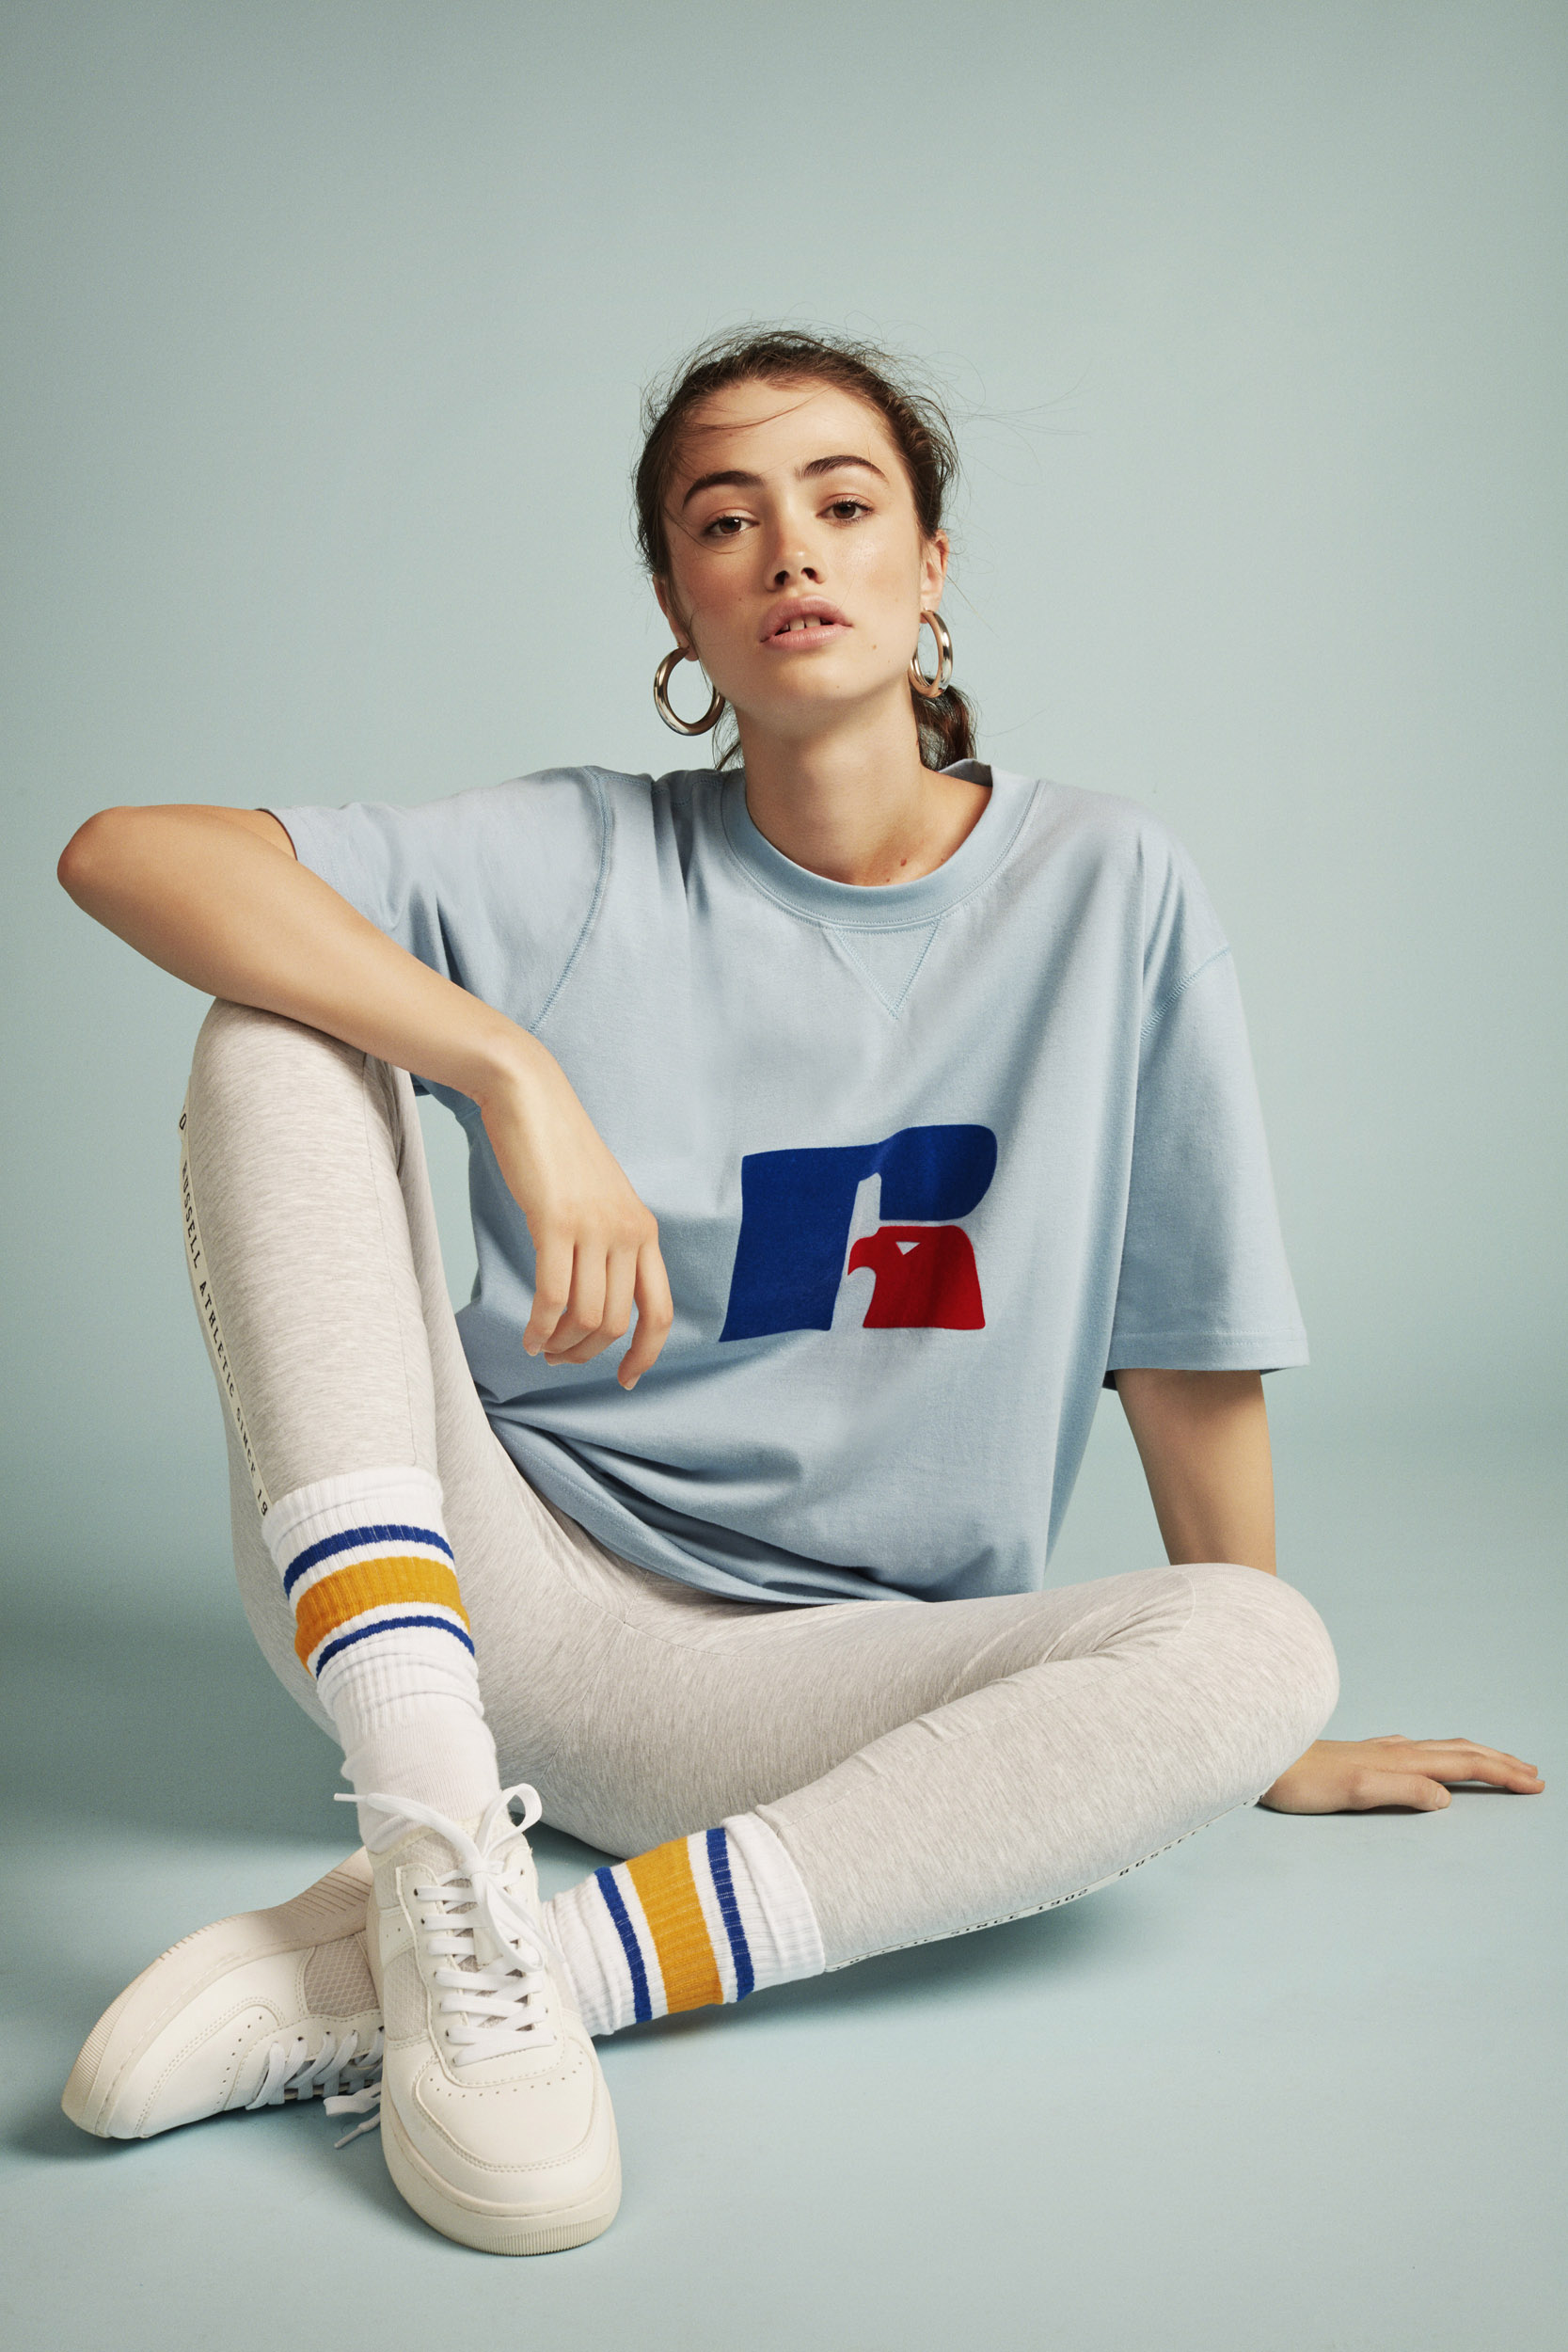 Photography Campaign SS19 for Russell Athletic EU by Anabel Luna